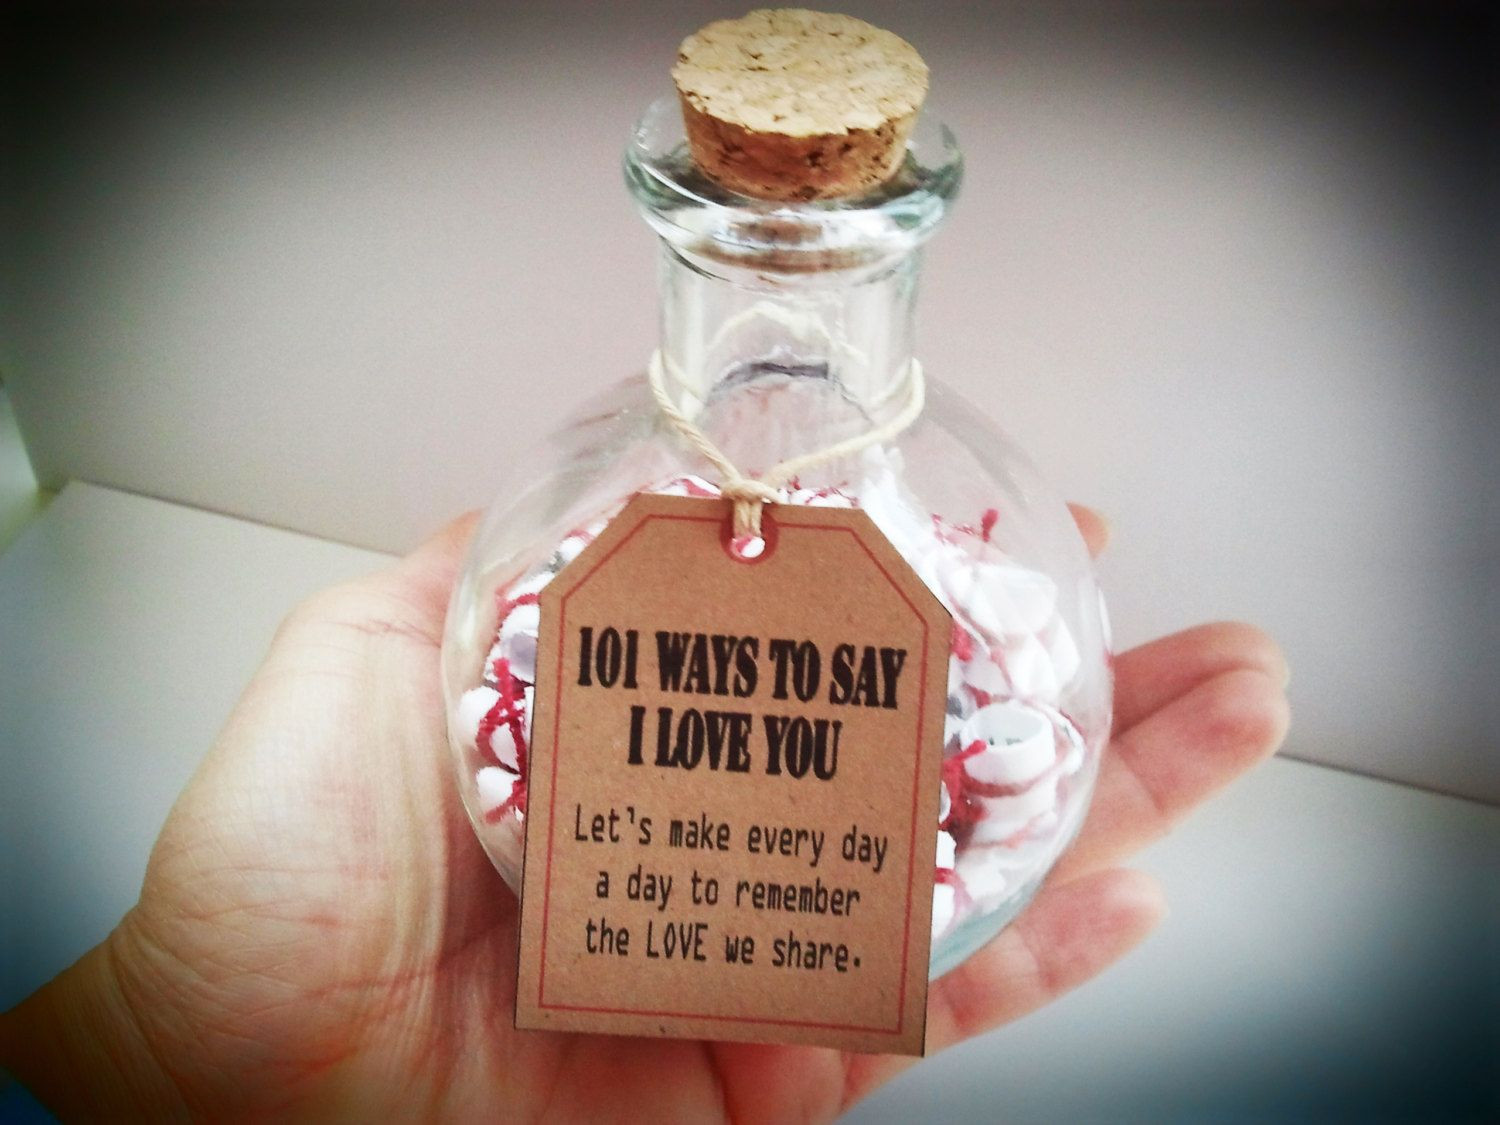 DIY Gifts That Say I Love You
 Anniversary Gifts Gift of Love "101 Ways to say I Love